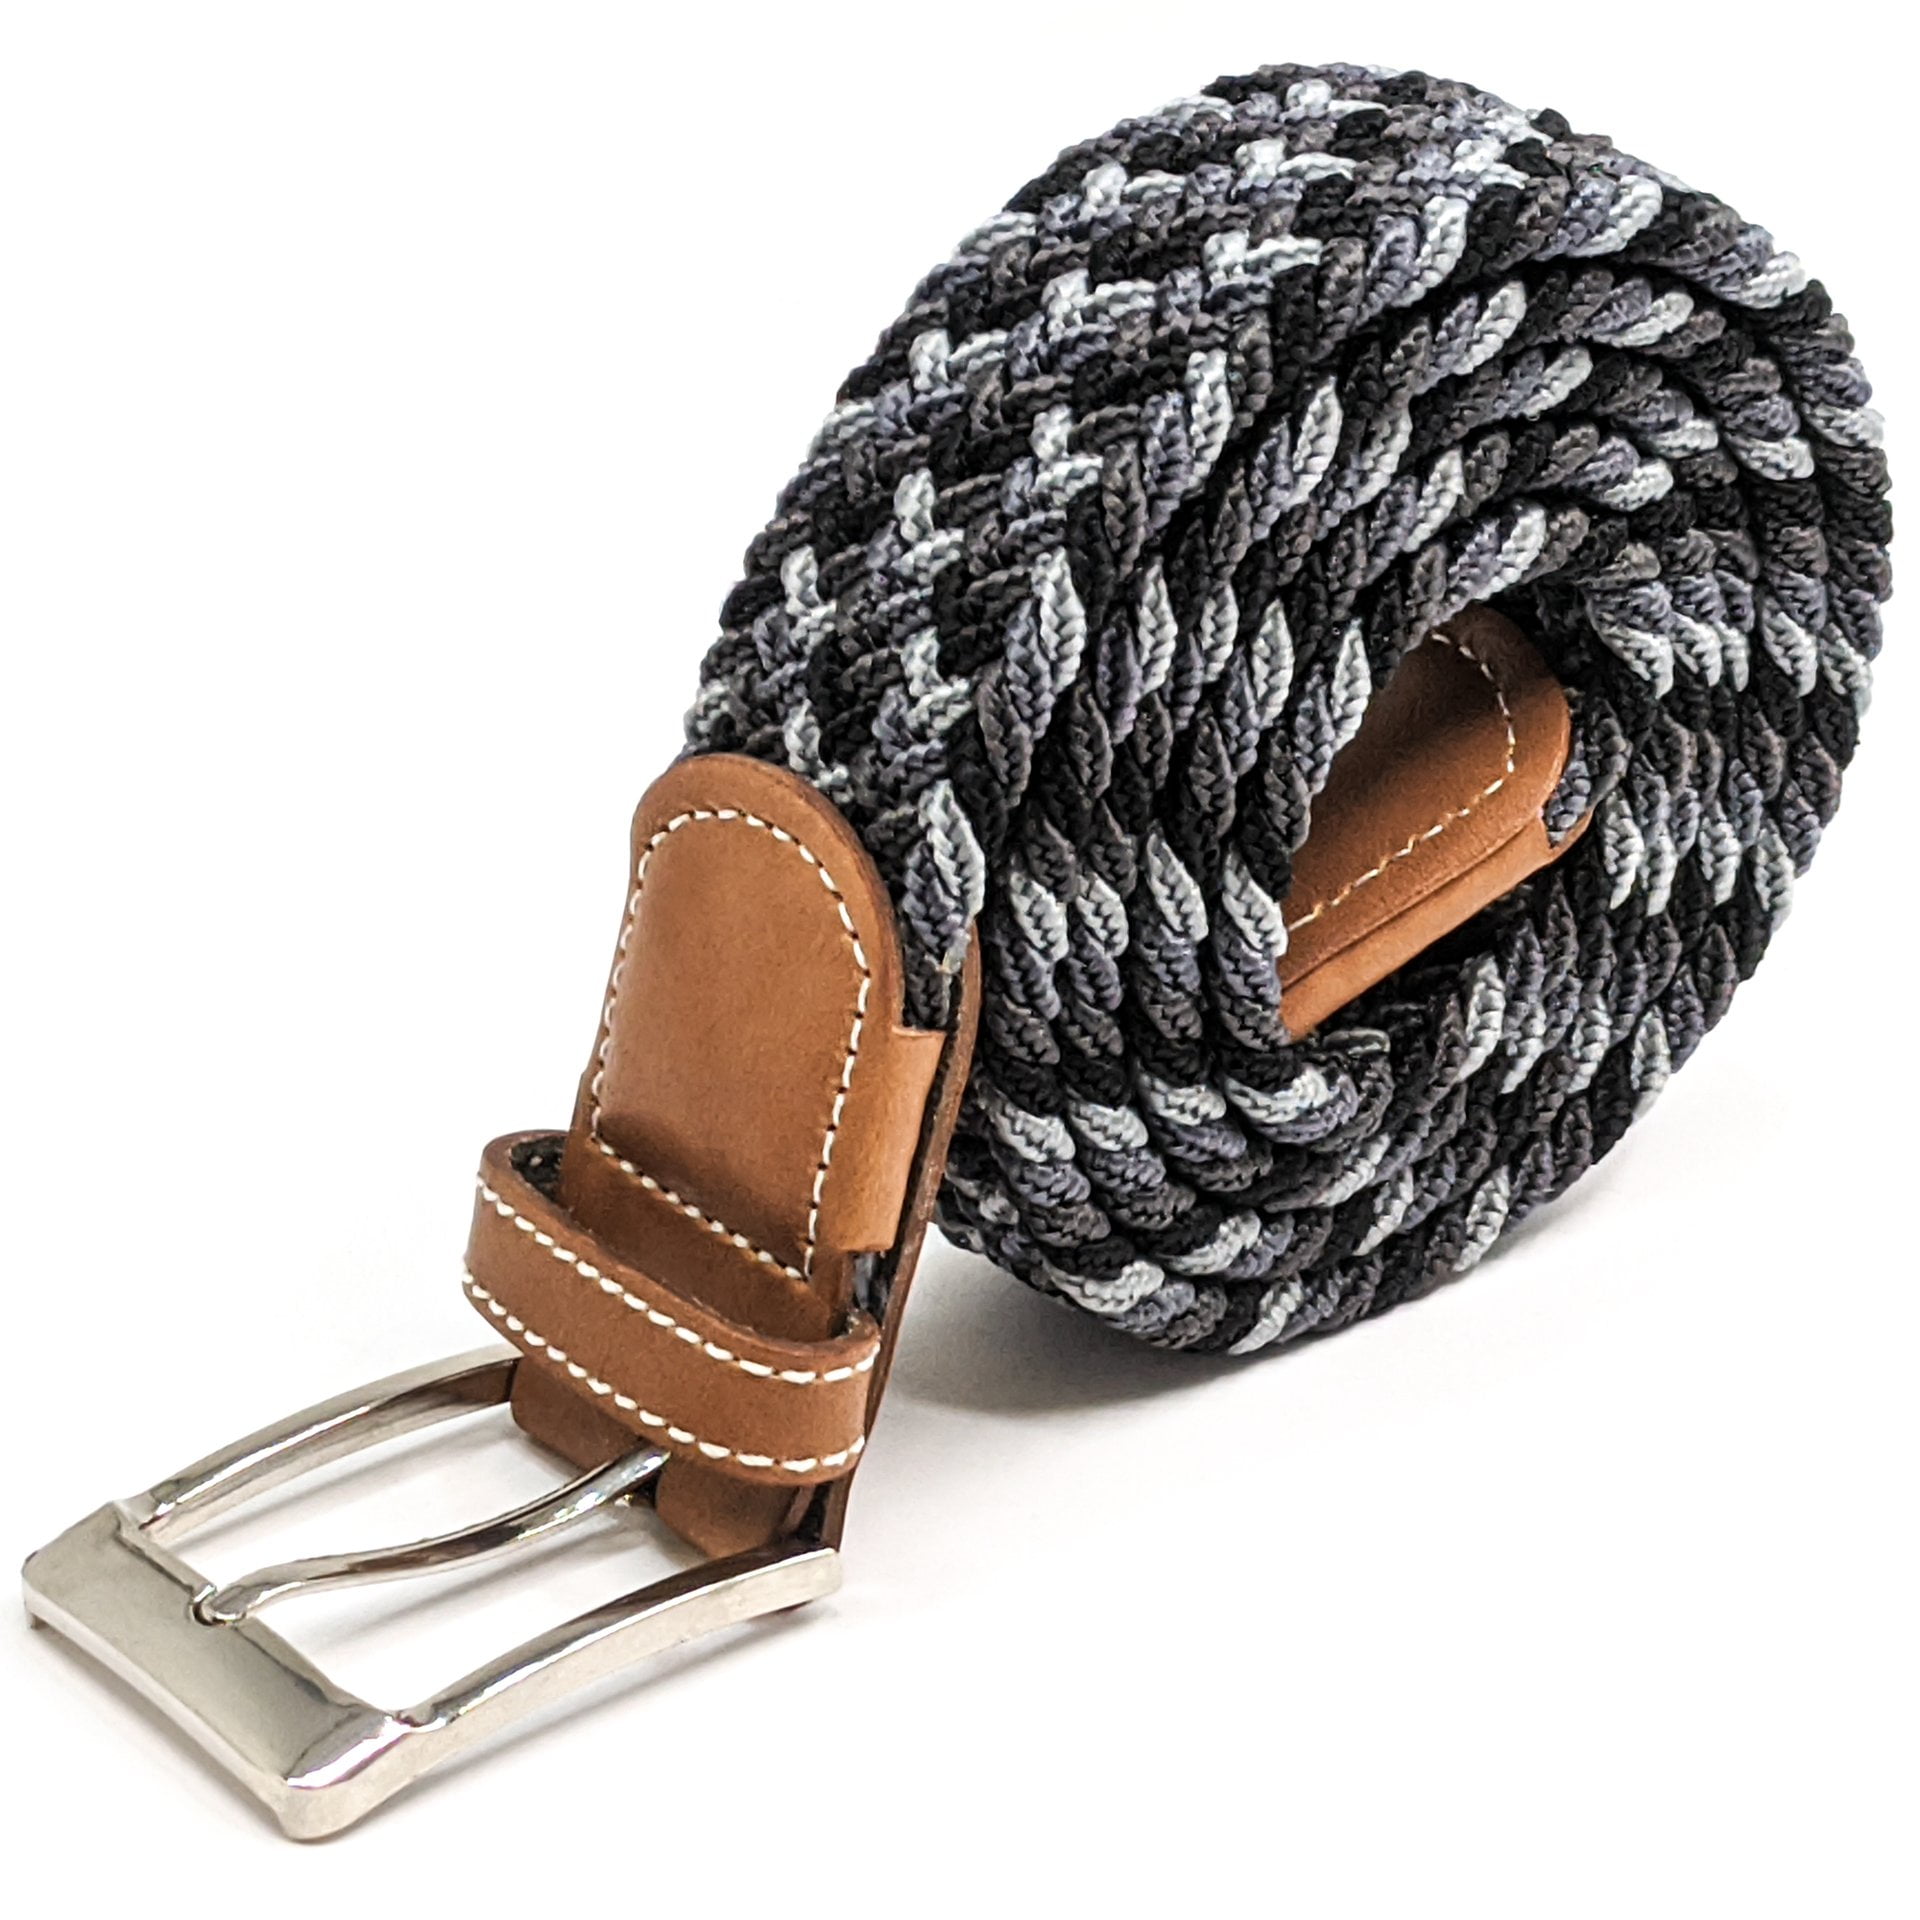 Anchor21 Anchor21 Braid Belts For Men Elastic Stretch Fabric Woven